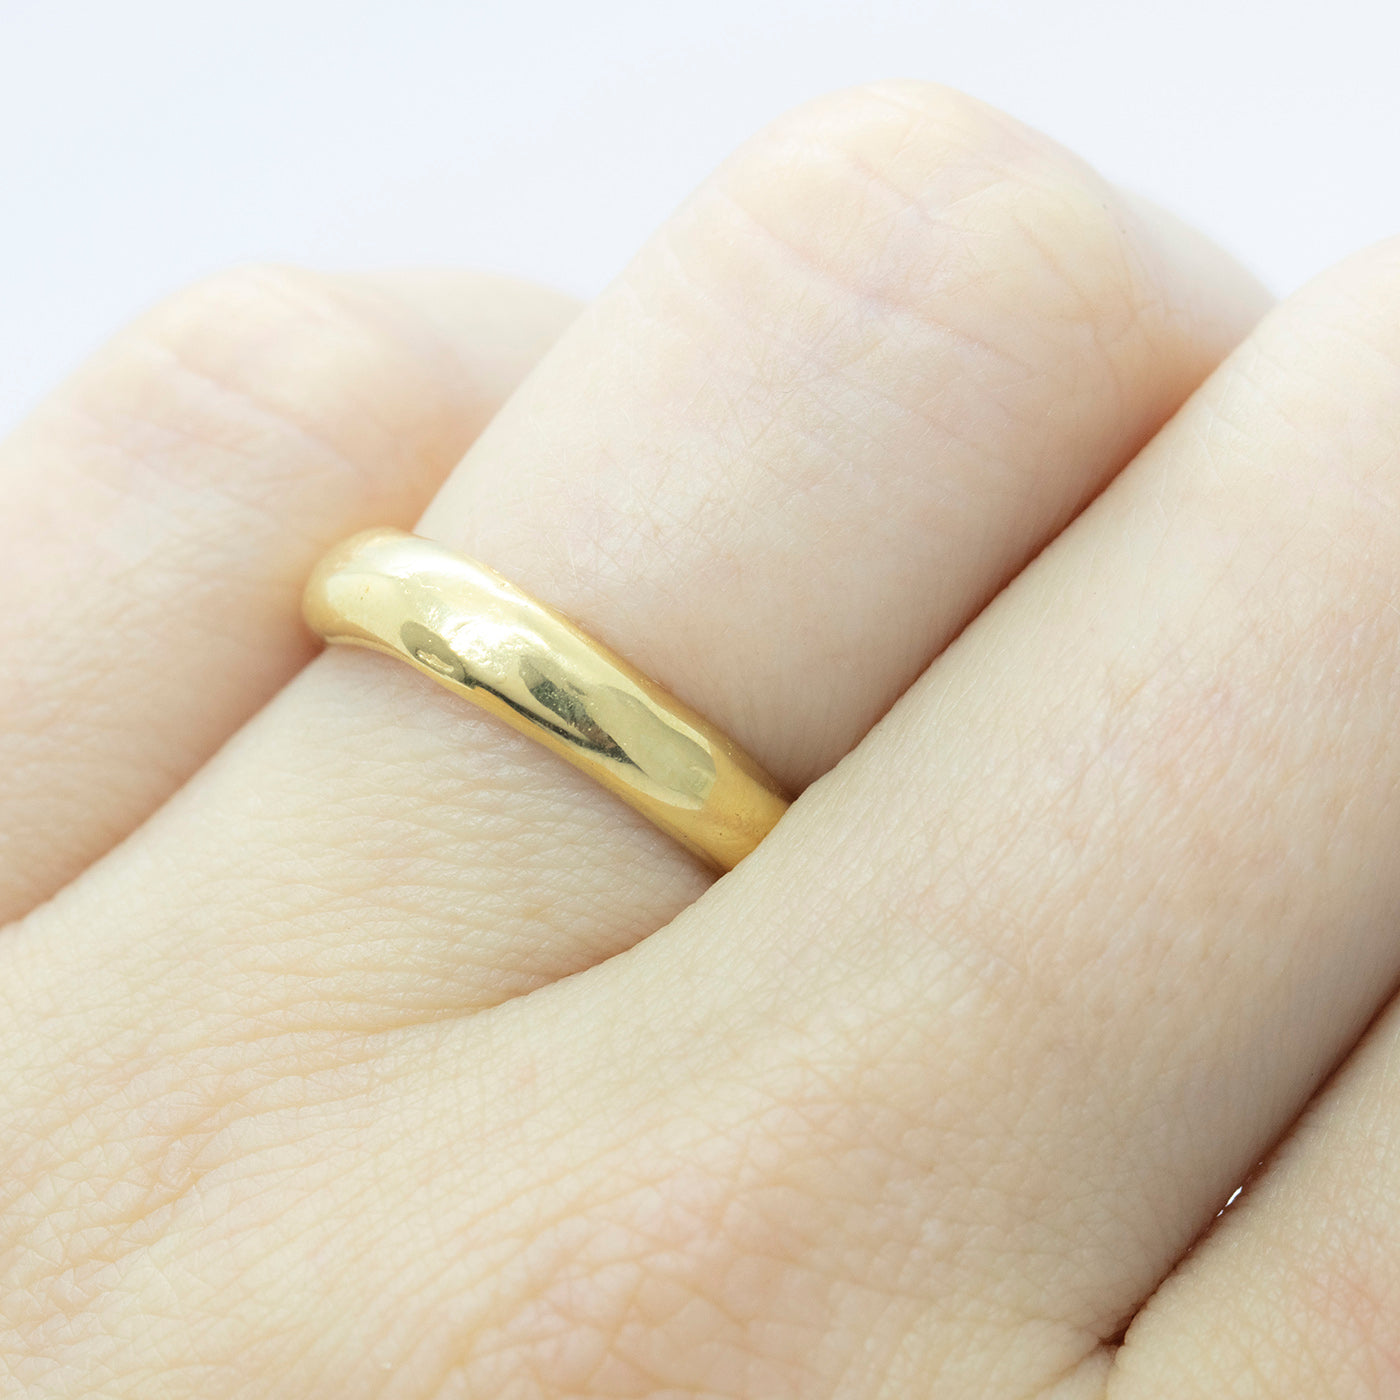 Ring Tara Wedding Band for Her 14ct or 18ct yellow gold product view innan jewellery independent atelier berlin